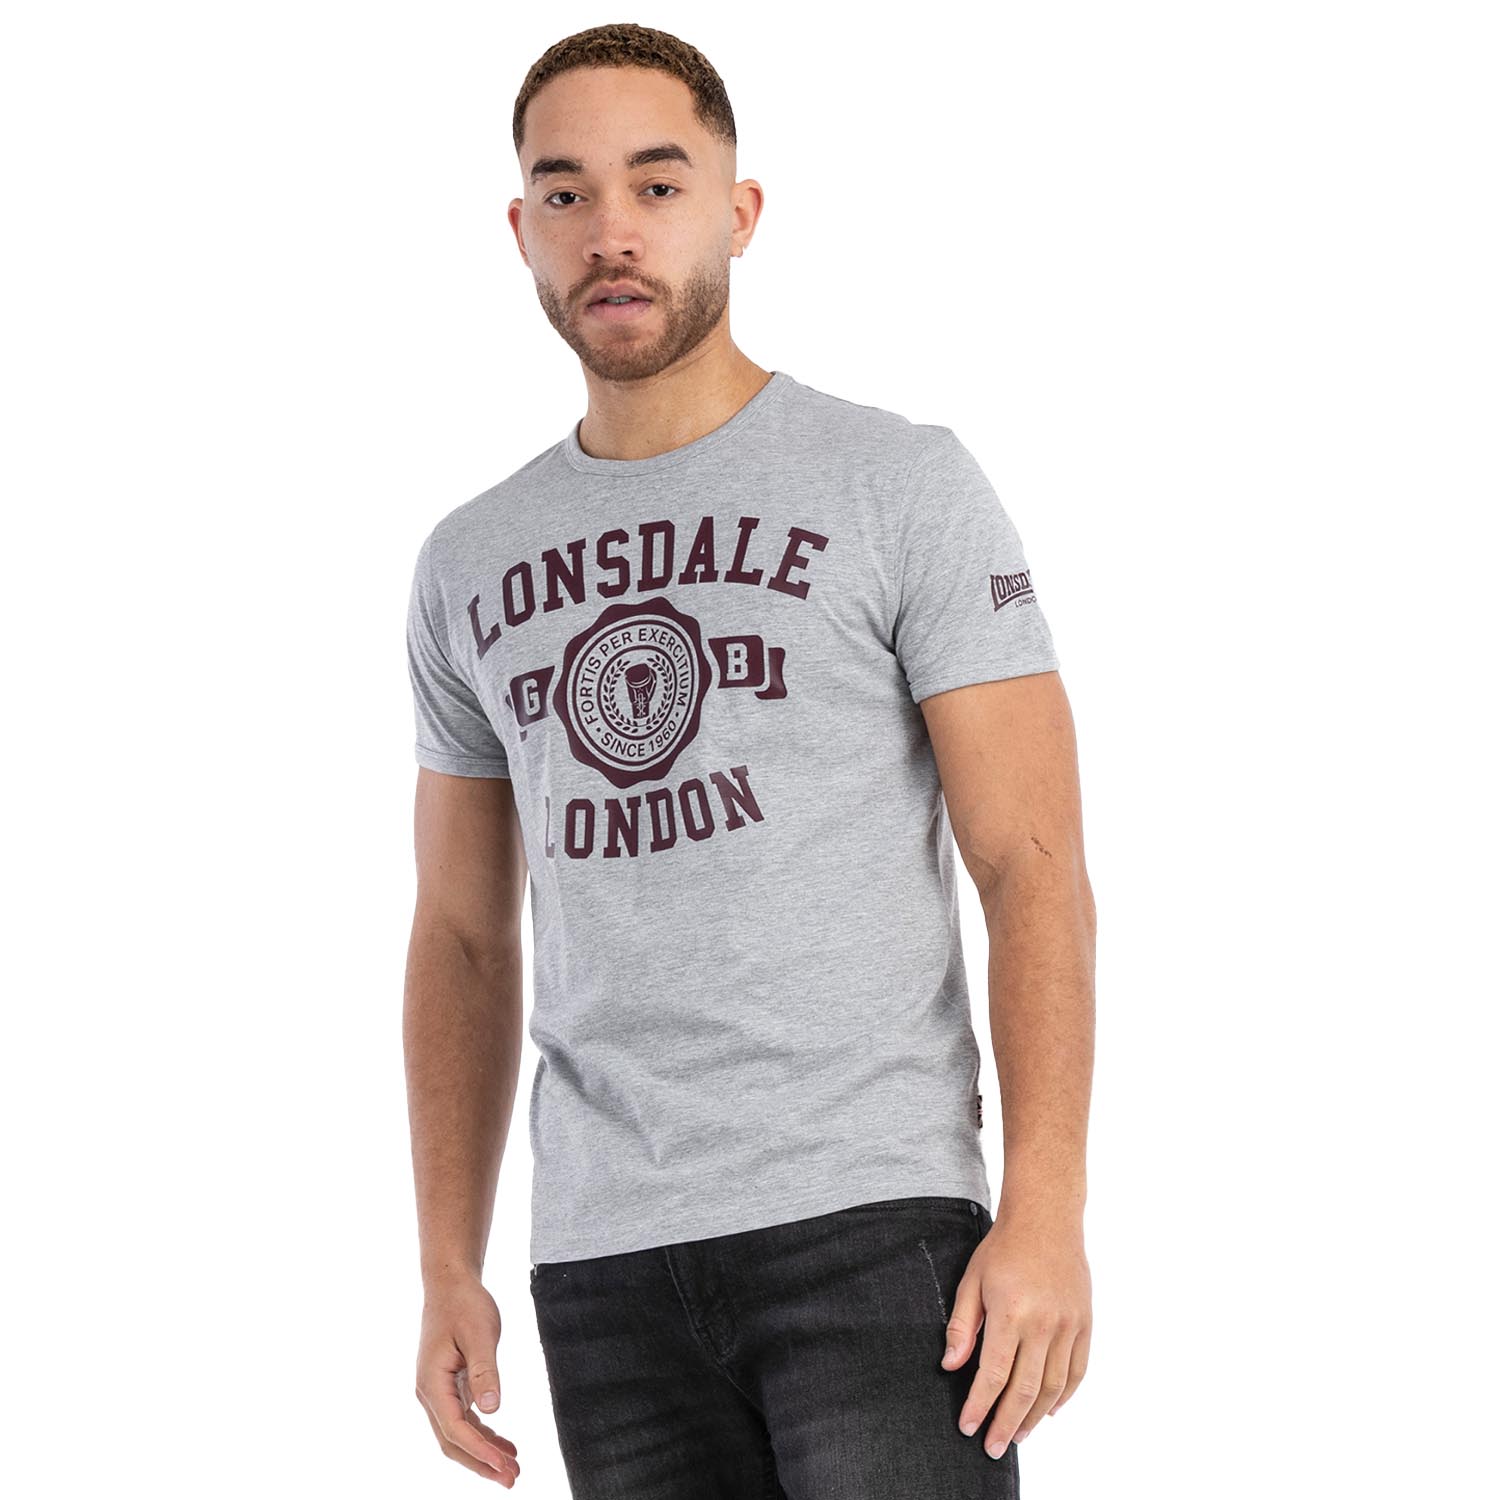 Lonsdale T-Shirt, Murrister, grey